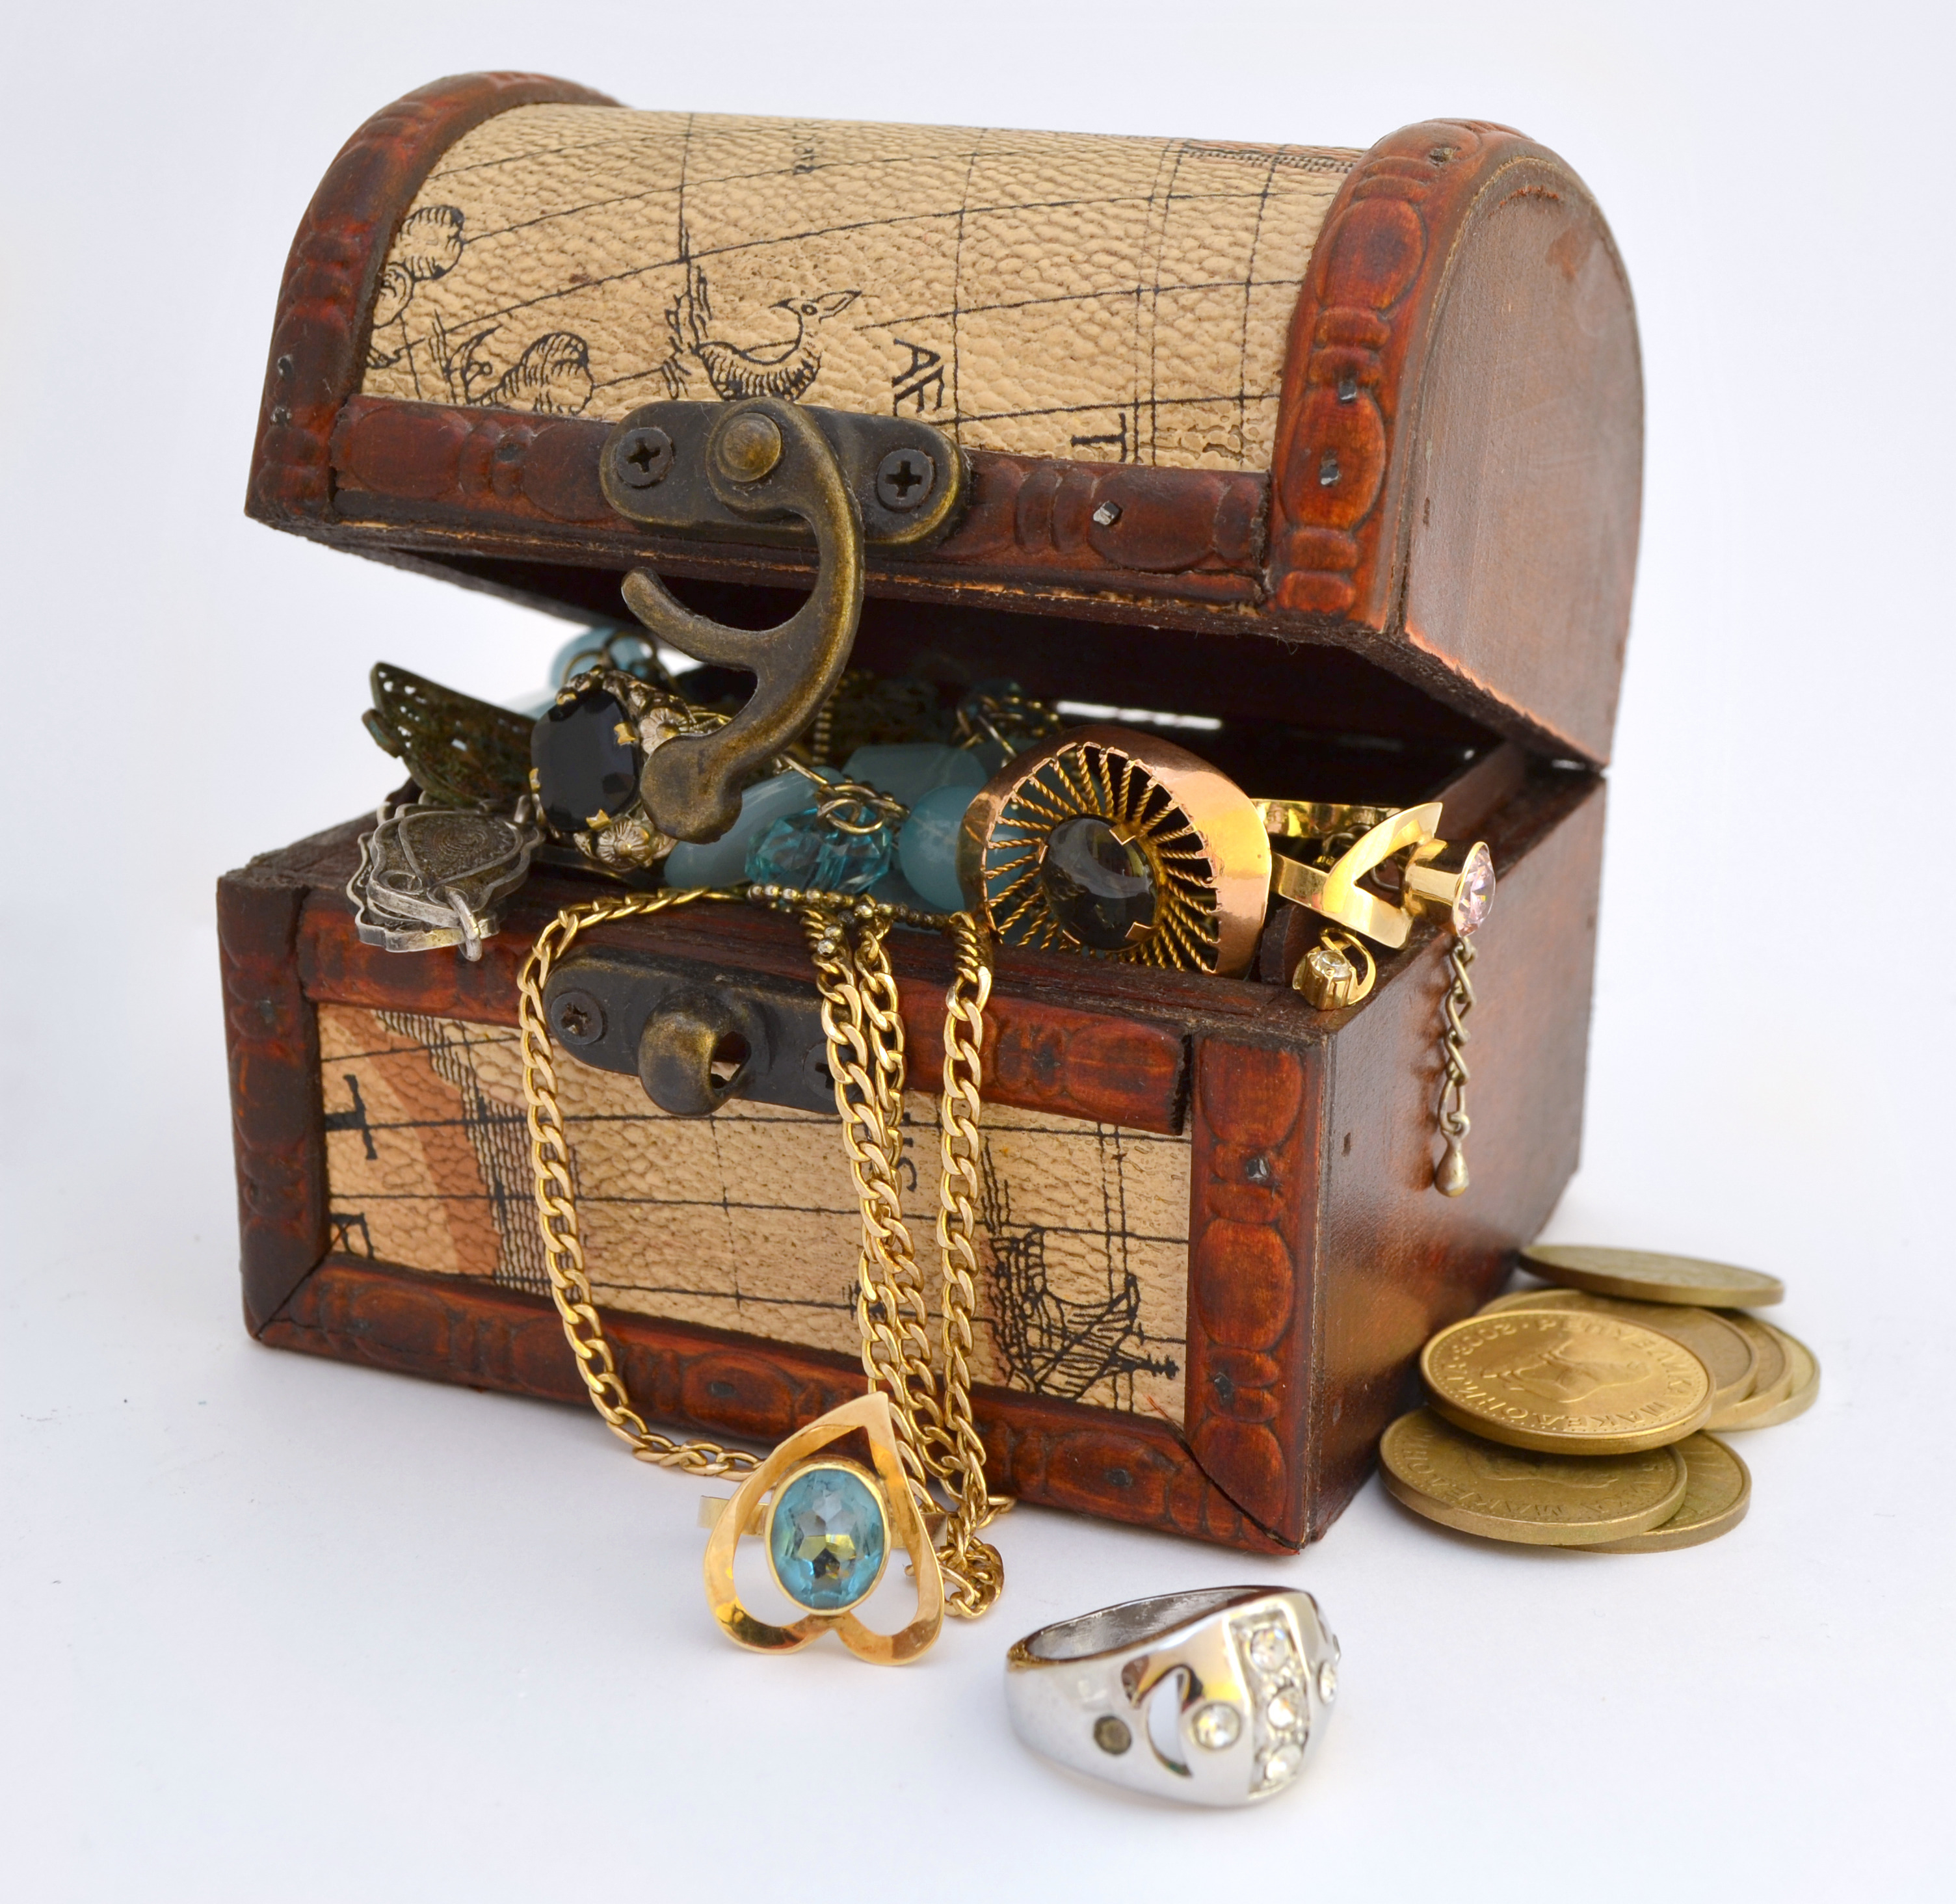 jewelry in a jewelry box of treasures